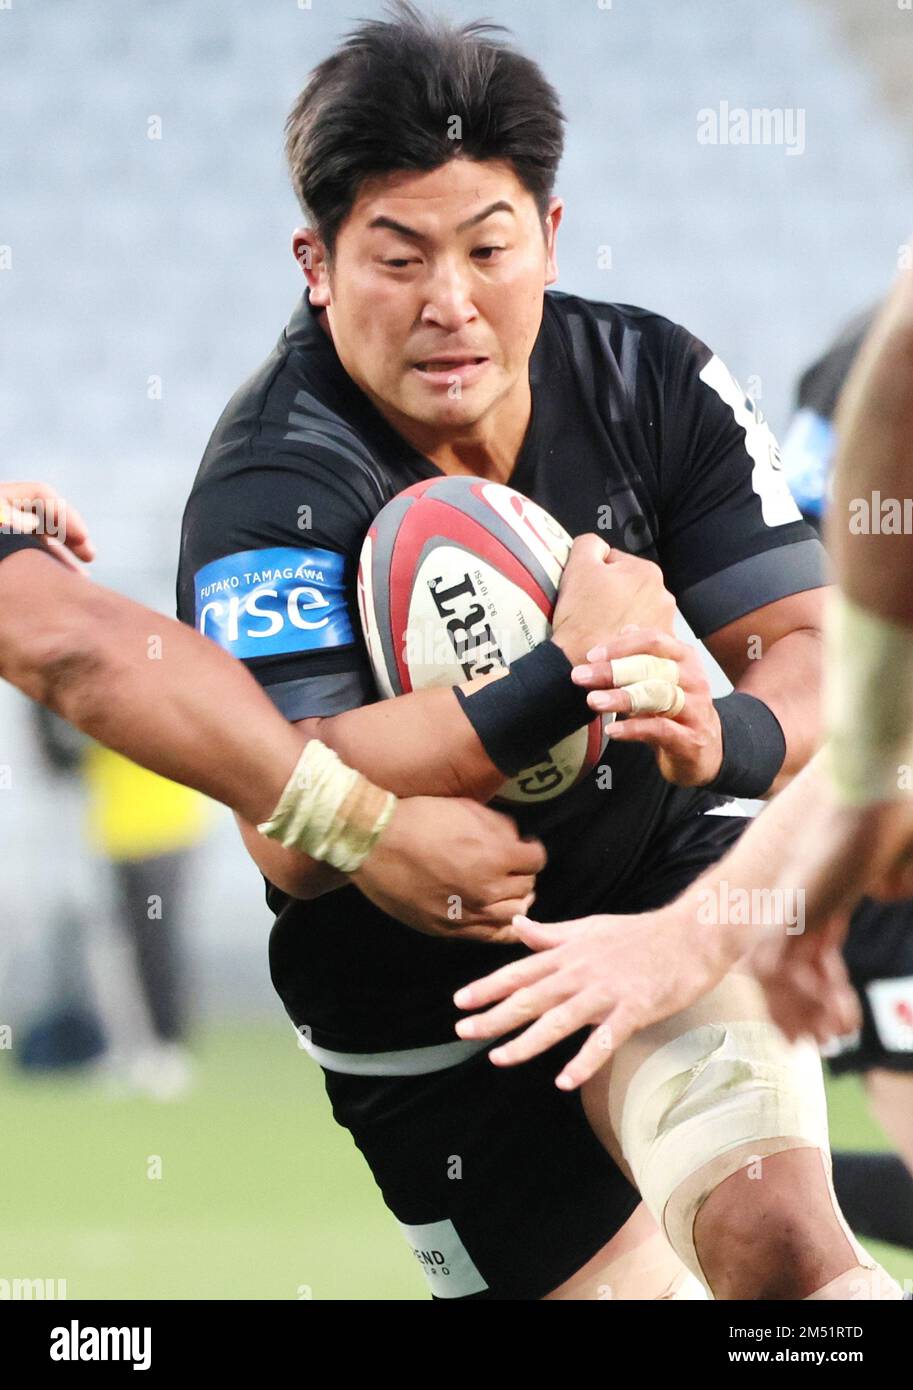 Kumagaya, Japan. 24th Dec, 2022. Ricoh Black Rams Tokyo No.8 Shuhei Matsuhashi carries the bal during the Japan Rugby League One match against Toshiba Brave Lupus Tokyo in Tokyo on Saturday, December 24, 2022. Brave Lupus defeated Black Rams 17-7. Credit: Yoshio Tsunoda/AFLO/Alamy Live News Stock Photo